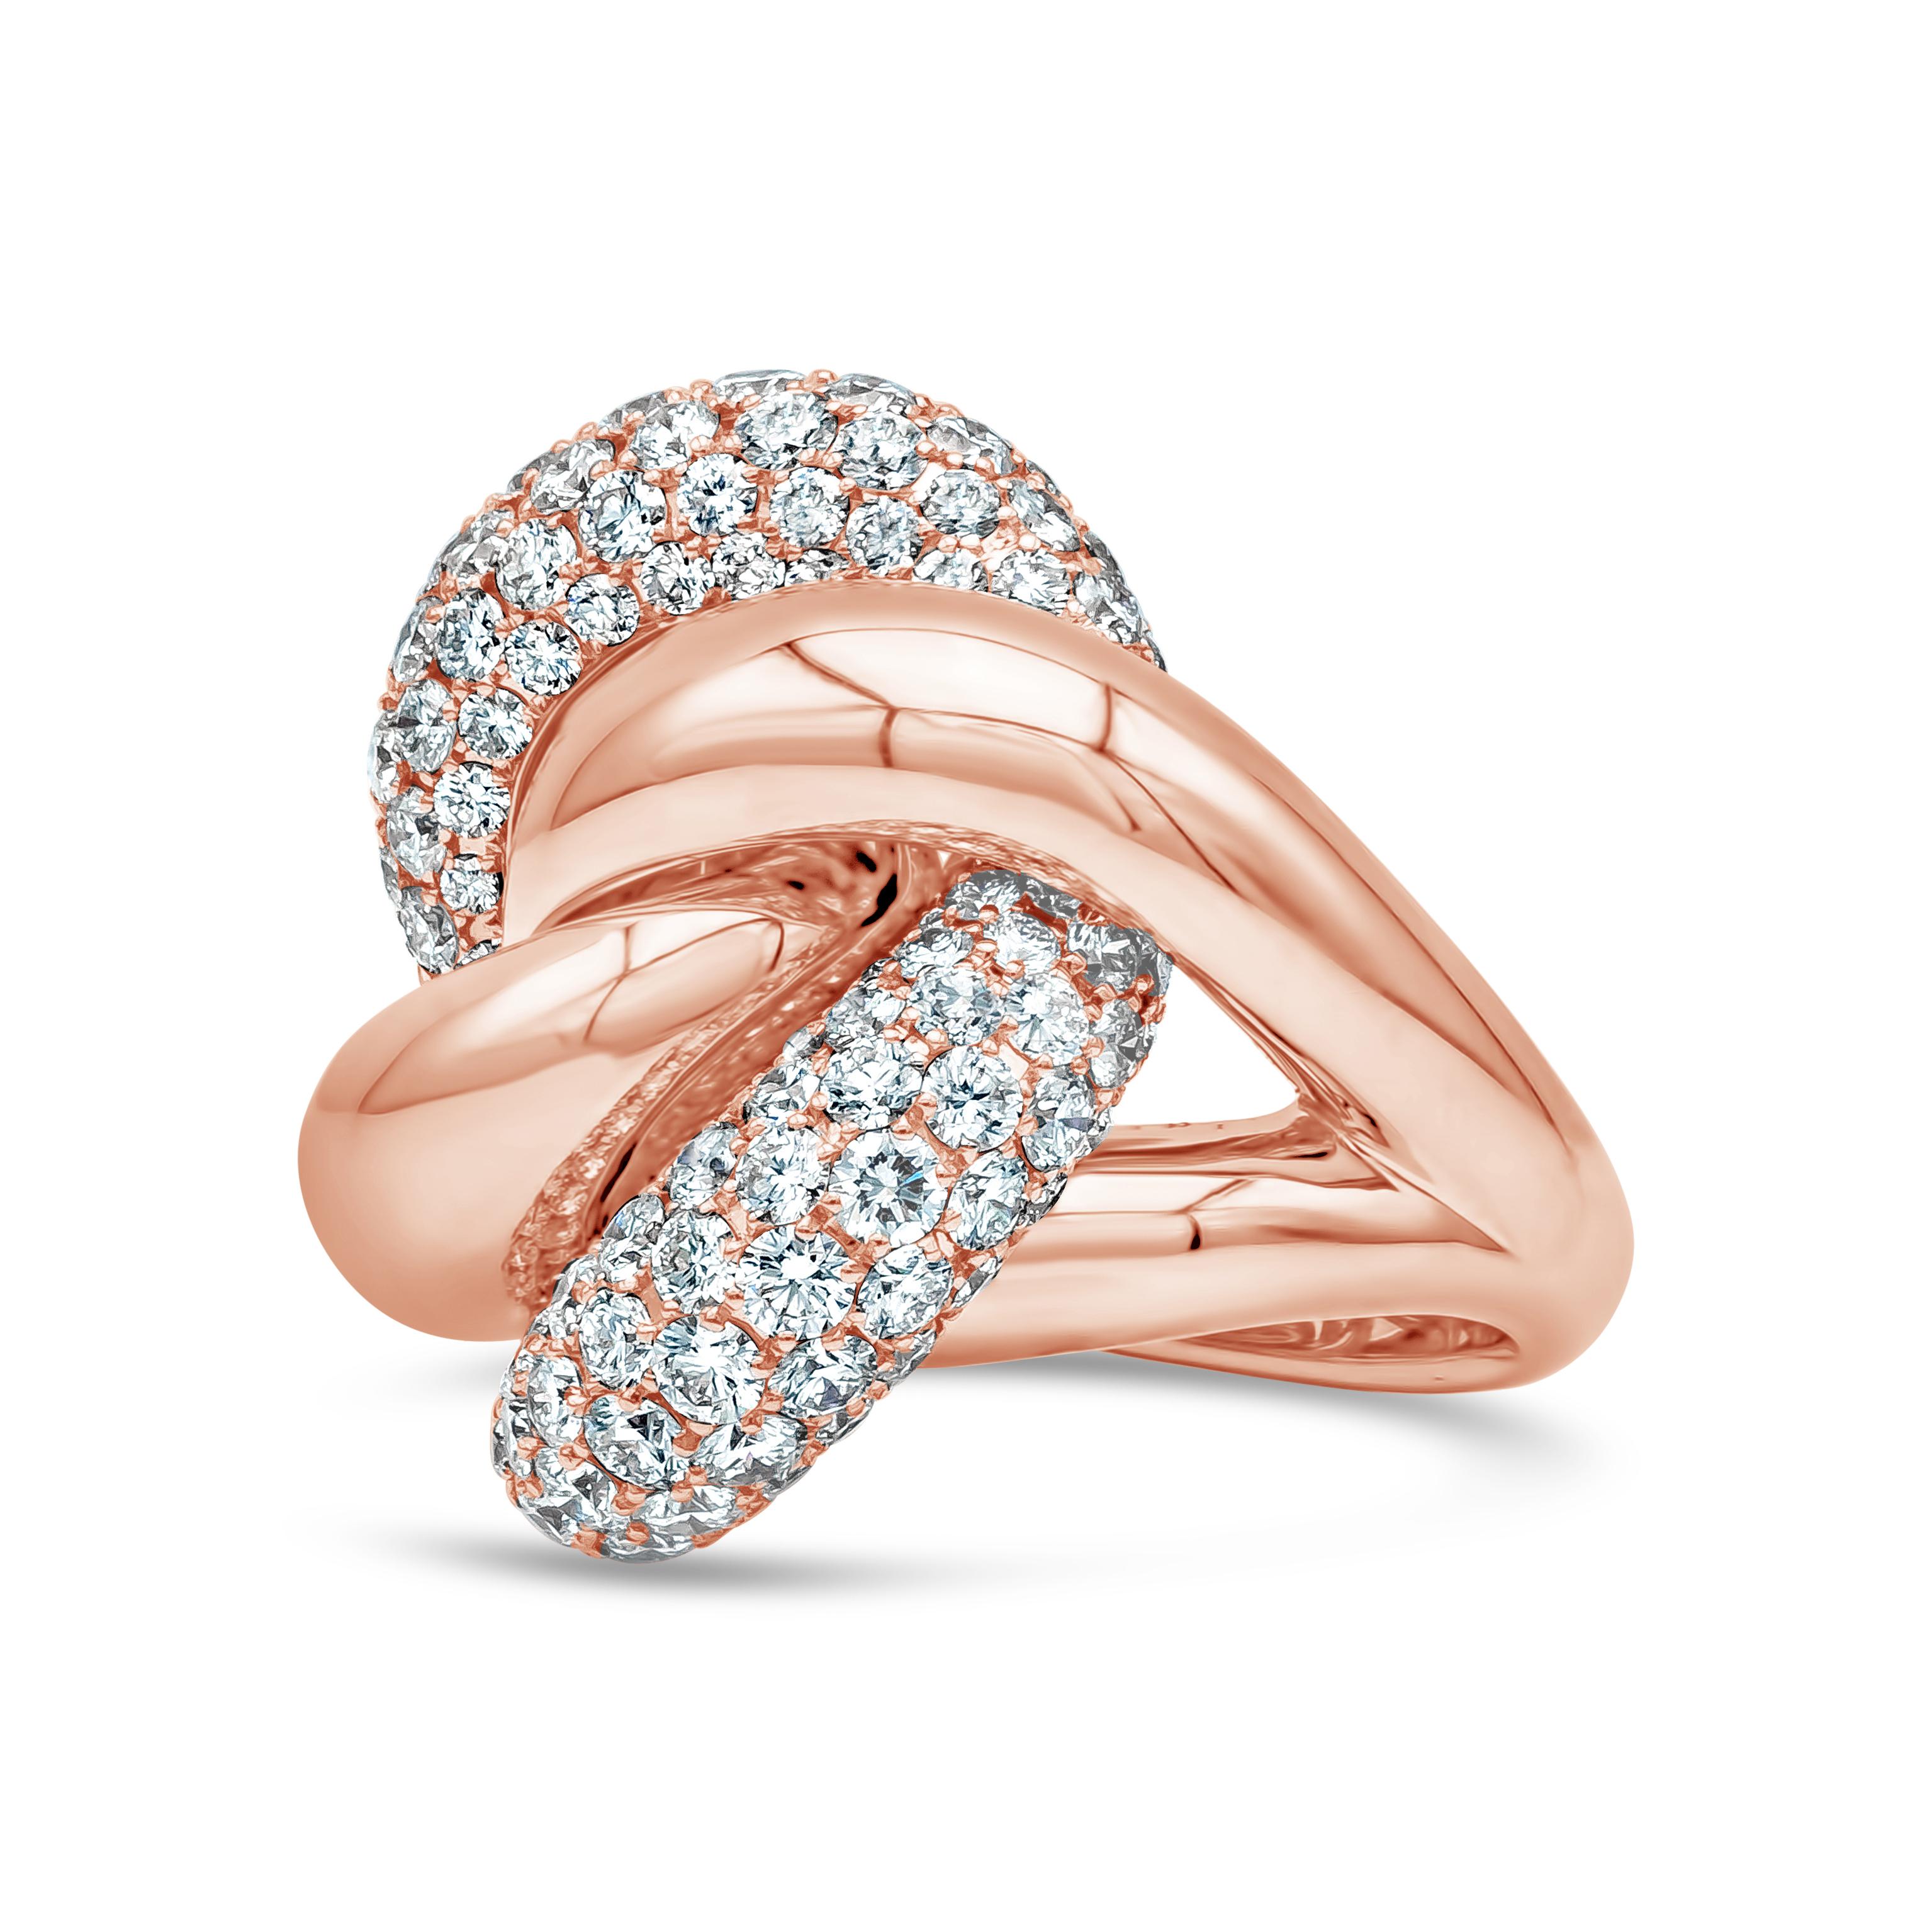 A chic and stylish fashion ring showcasing round brilliant diamonds that weigh 5.80 carats total in F Color and VS in Clarity. Set in an intricately designed intertwined mounting made in 18K Rose Gold. Size 7 US and resizable upon request.

Roman